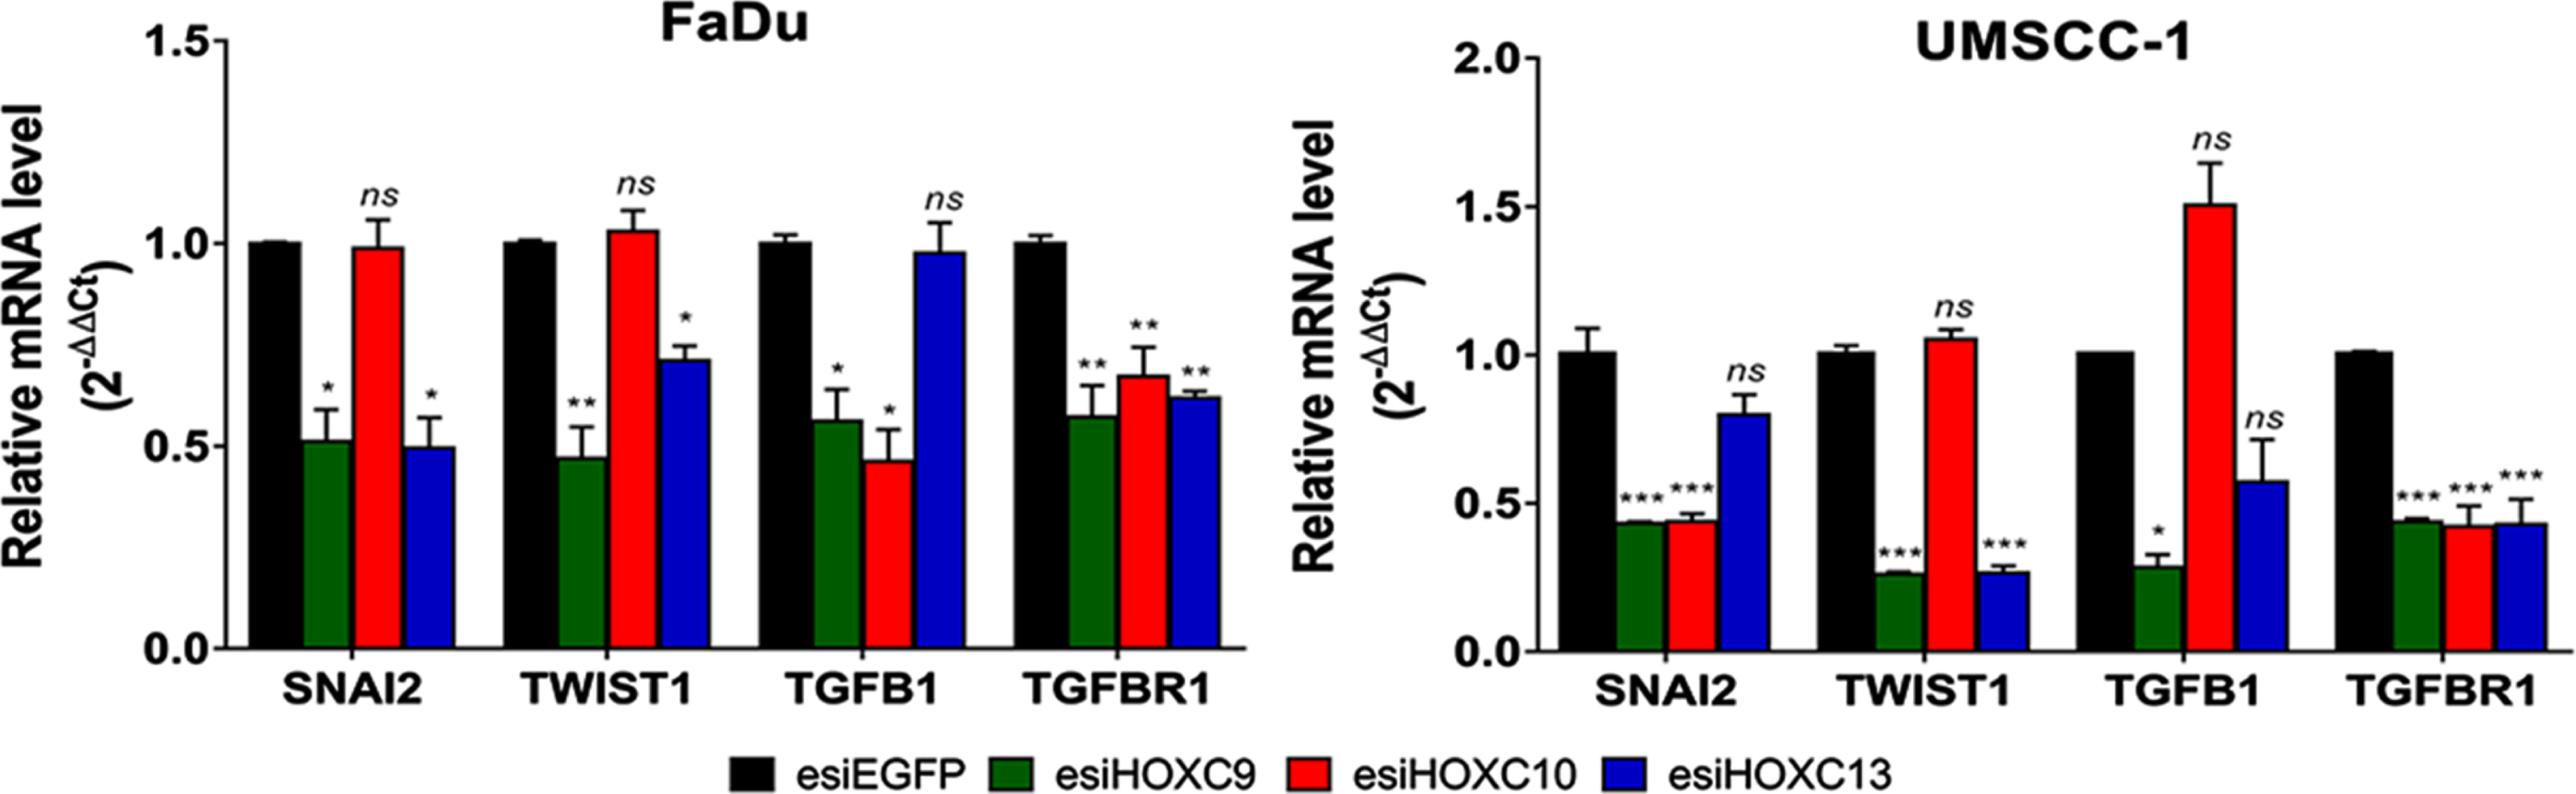 Effect of selected HOX gene knockdowns on the expression of their putative transcriptional targets involved with the EMT process. Relative expression of HOX target genes (SNAI2, TWIST1, TGFB1, and TGFBR1), after transfection with esiEGFG (control), esiHOXC9, esiHOXC10 or esiHOXC13. The mRNA level was detected by RT-qPCR, in FaDu (left) and UMSCC-1 (right), and the relative expression was calculated with the 2–Δ
ΔCt method, using TBP as endogenous control and the expression in the sample from control cells (transfected with esiEGFP) as reference/calibrator. Kruskal-Wallis followed by Dunn’s post hoc test was used for statistical analysis. Each experiment was performed three times and each time in triplicate. ns: not significant,  *p <  #x003C;<  #x200A;0.05,  **p <  #x003C;<  #x200A;0.01 and  ***p <  #x003C;<  #x200A;0.001.